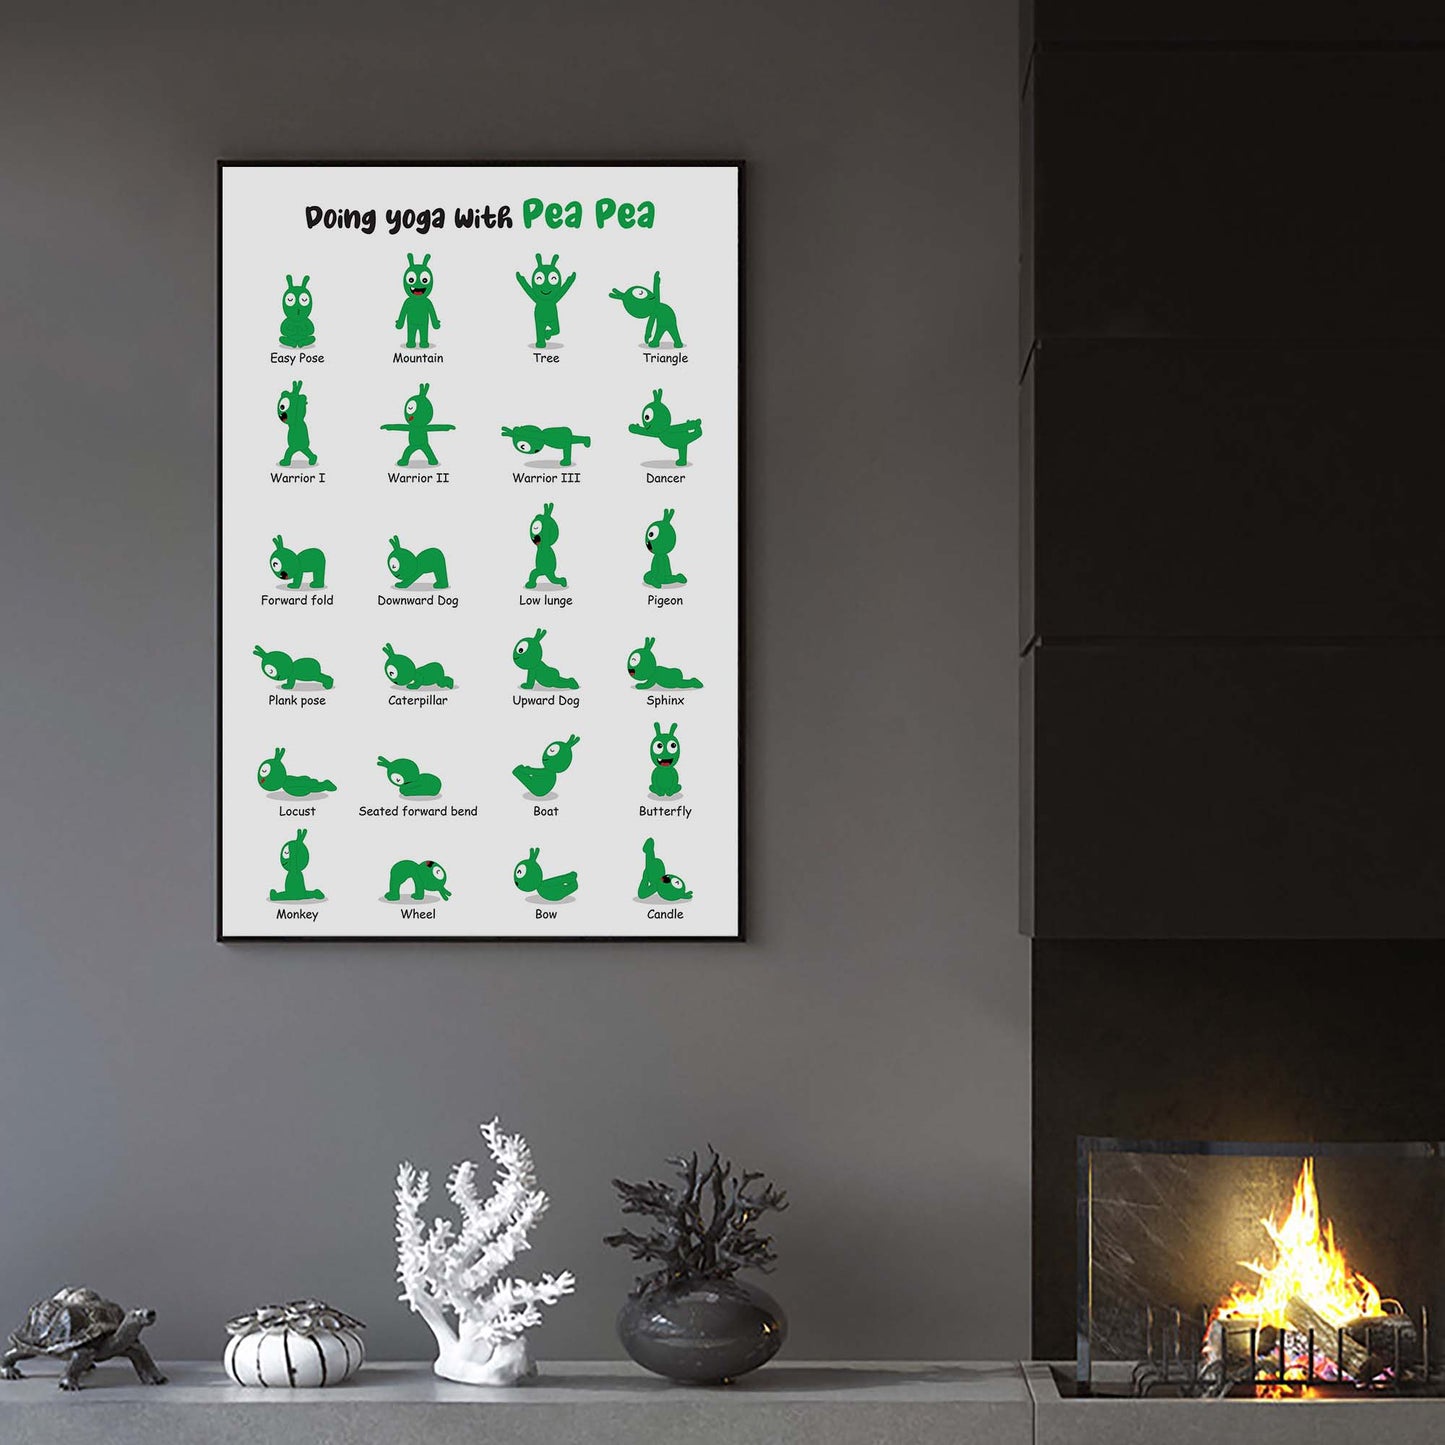 Doing Yoga With Pea Pea Poster, Pea Pea Yoga Poses Posters For Kids